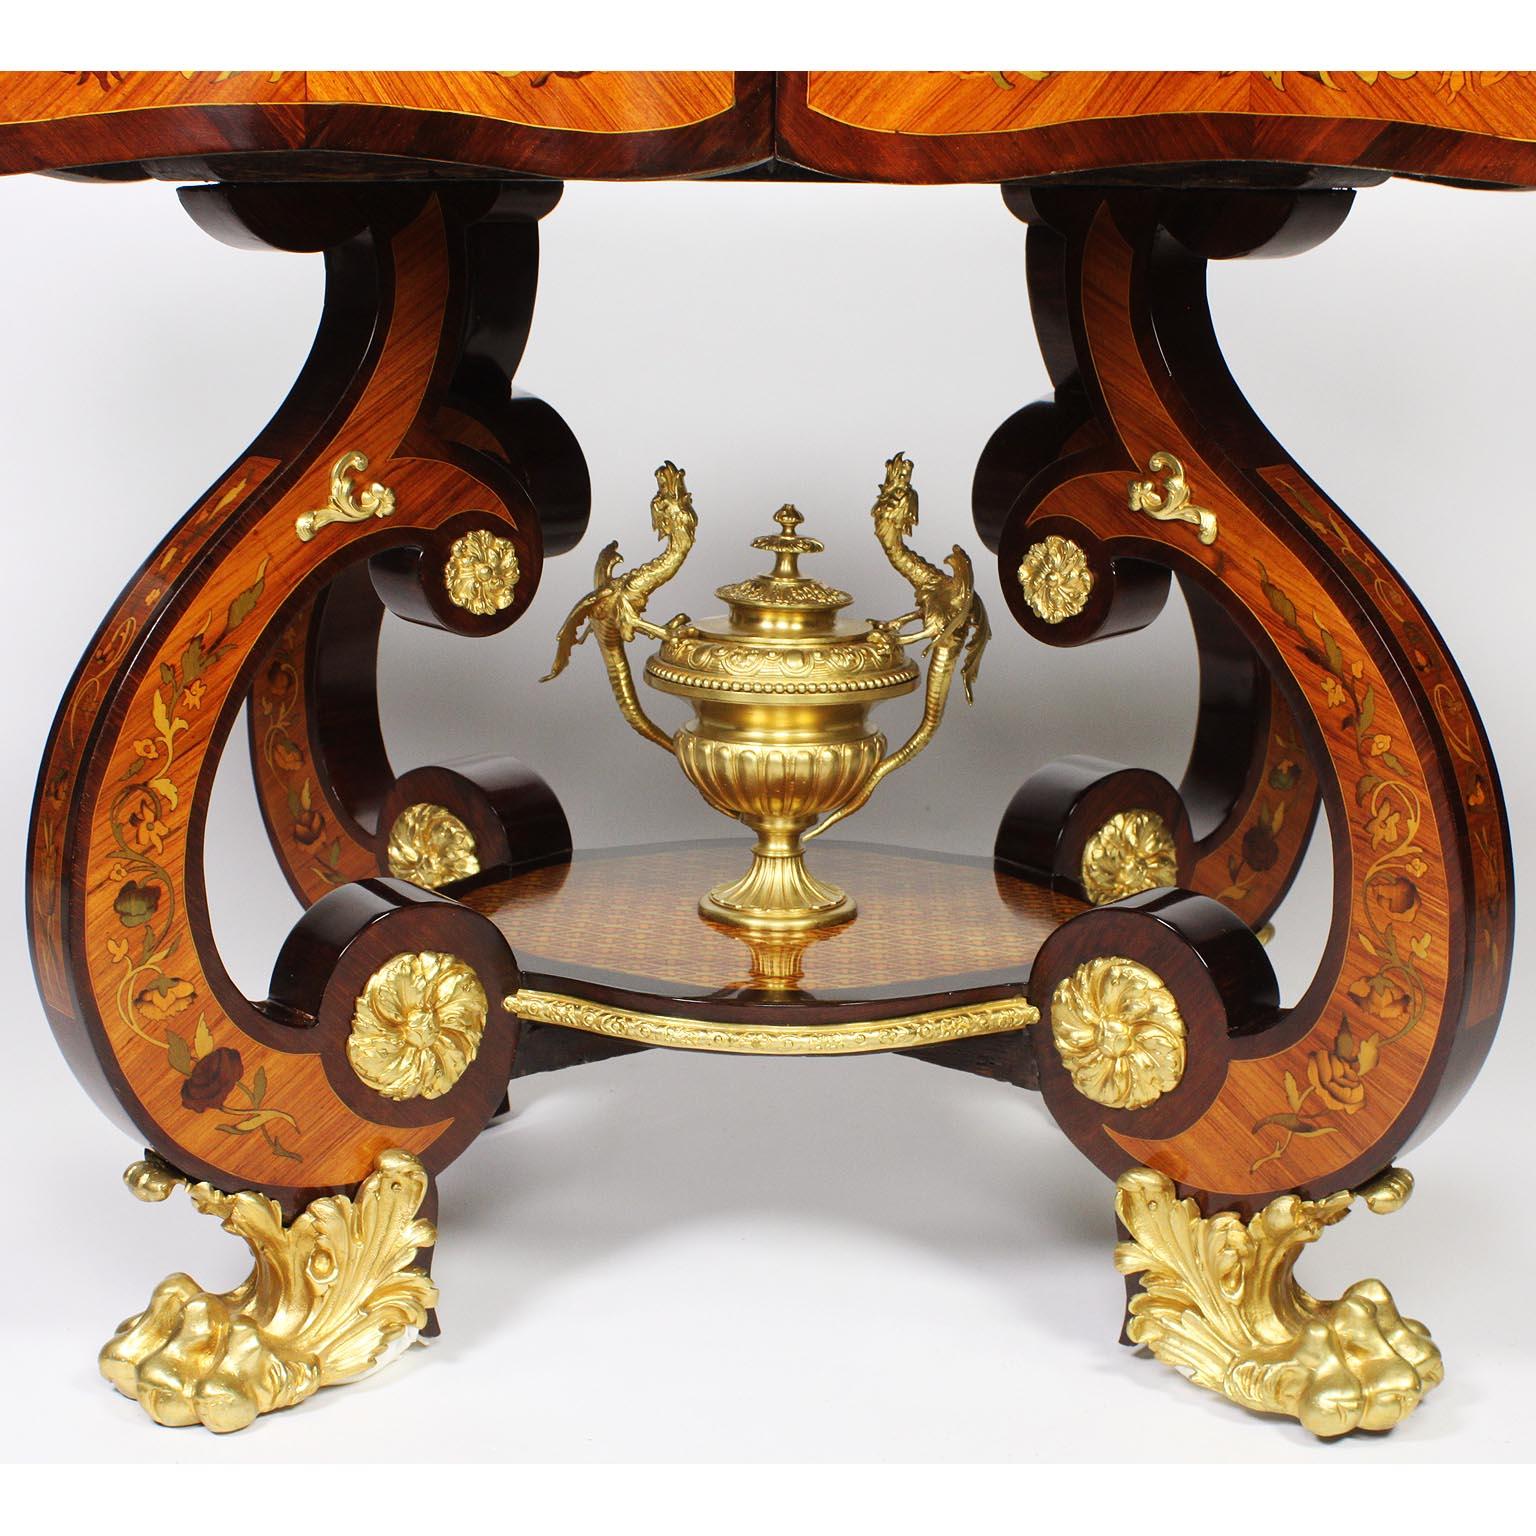 Fine Italian 19th Century Floral Marquetry Gilt Bronze-Mounted Center Table Desk In Good Condition For Sale In Los Angeles, CA